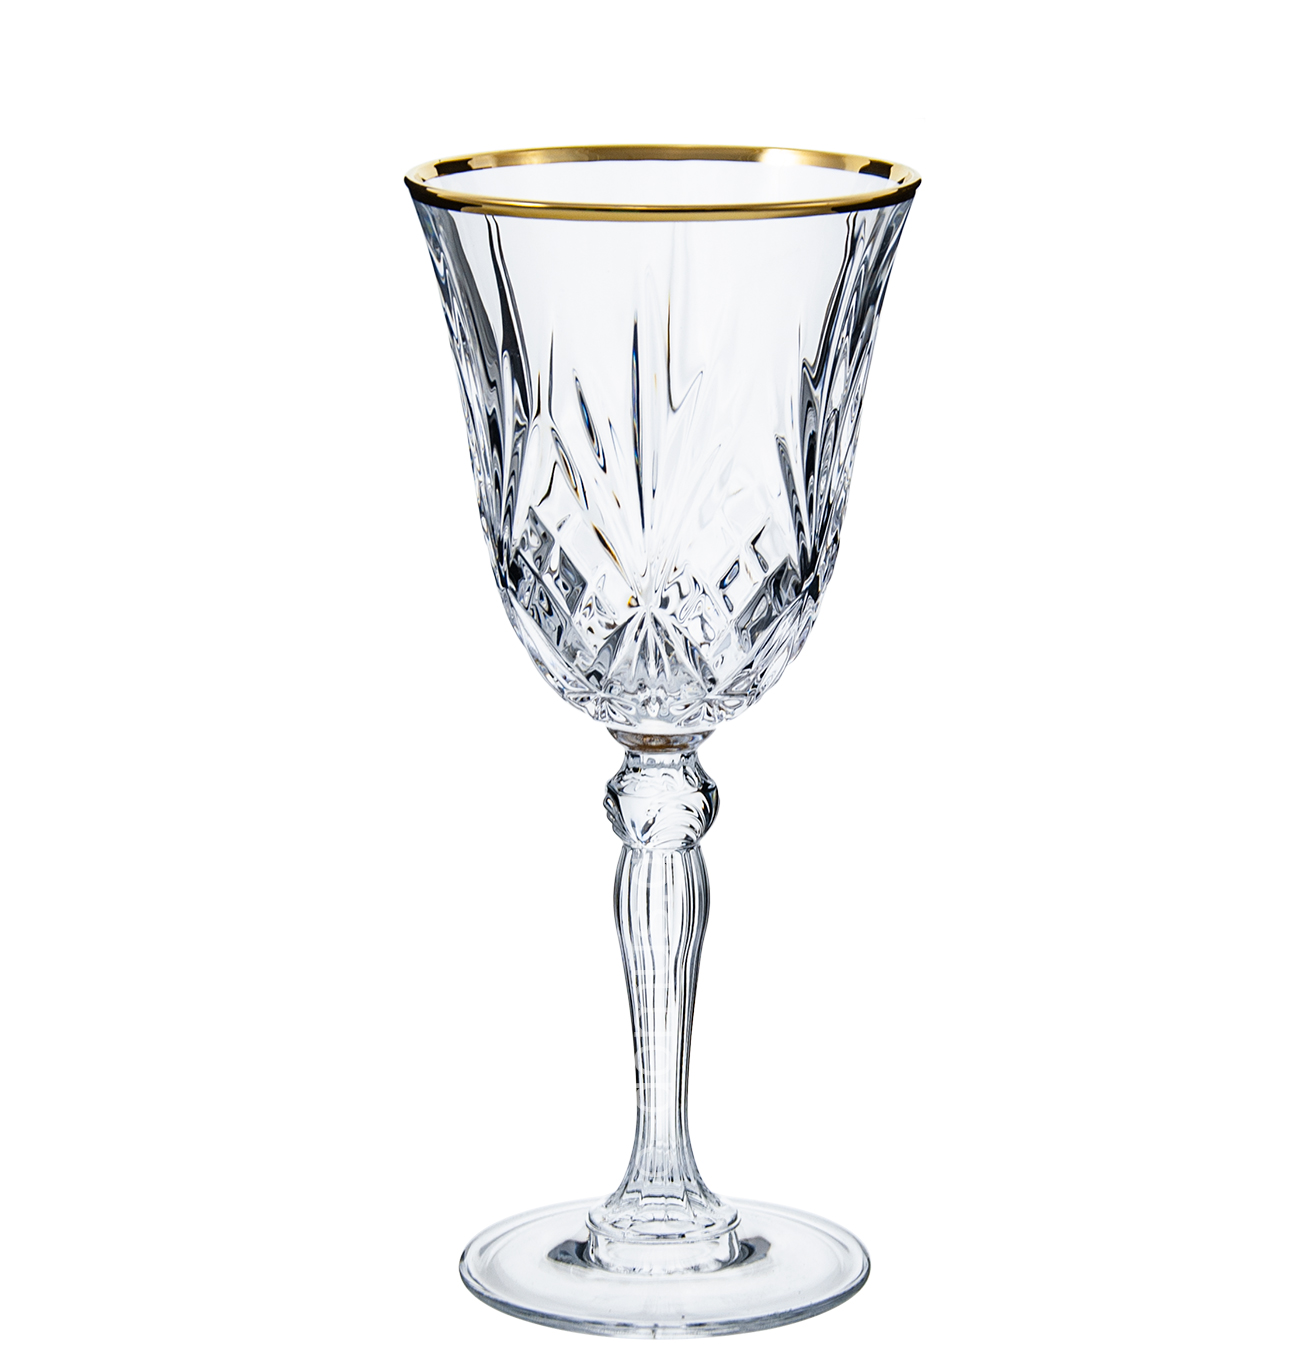 MELODIA GOLD Wine Glass 270ml LUXION PROFESSIONAL RCR ITALY